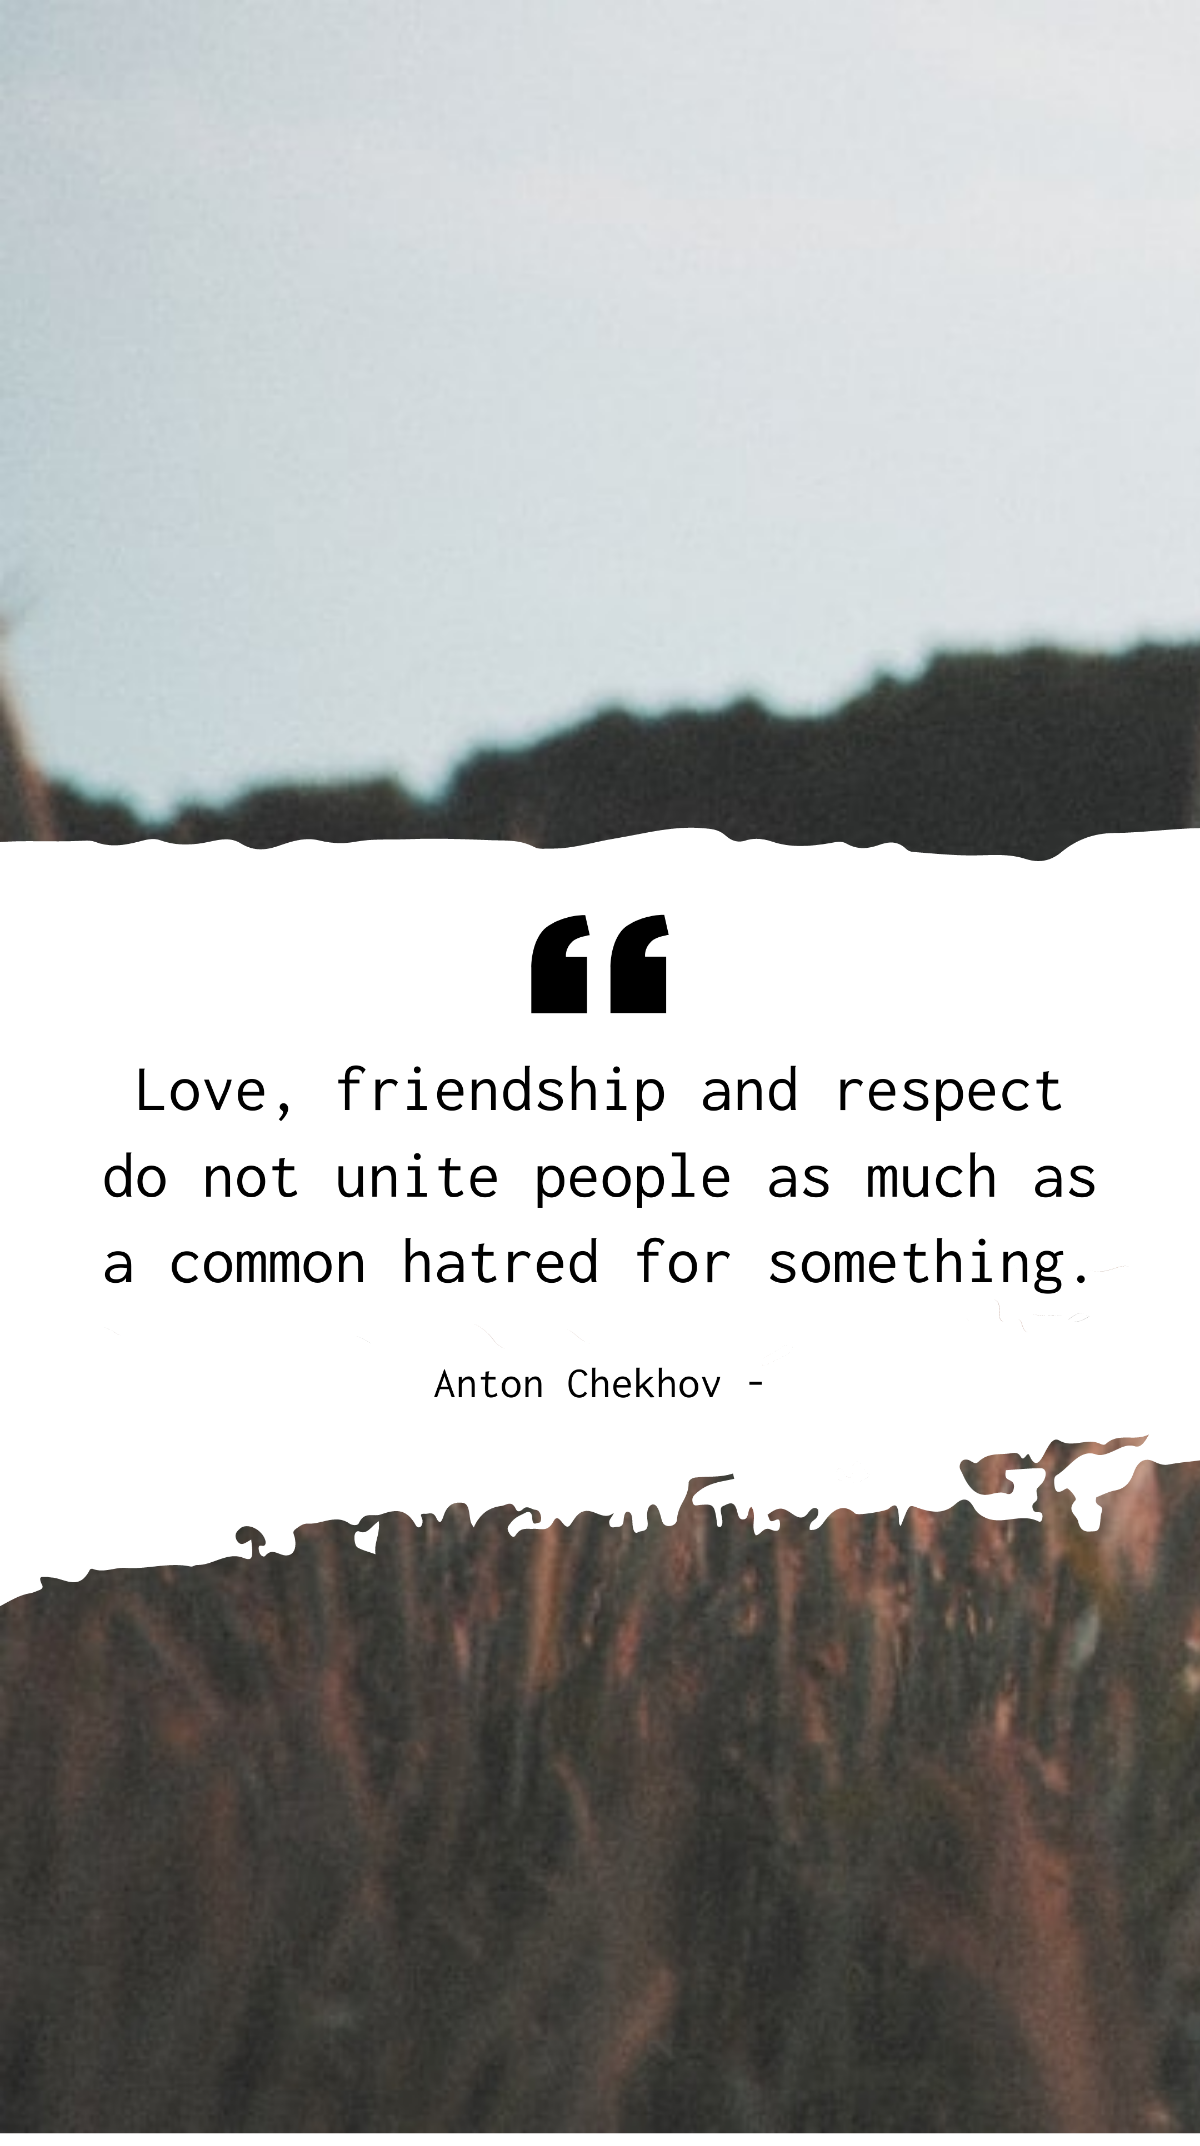 Anton Chekhov - Love, friendship and respect do not unite people as much as a common hatred for something. Template